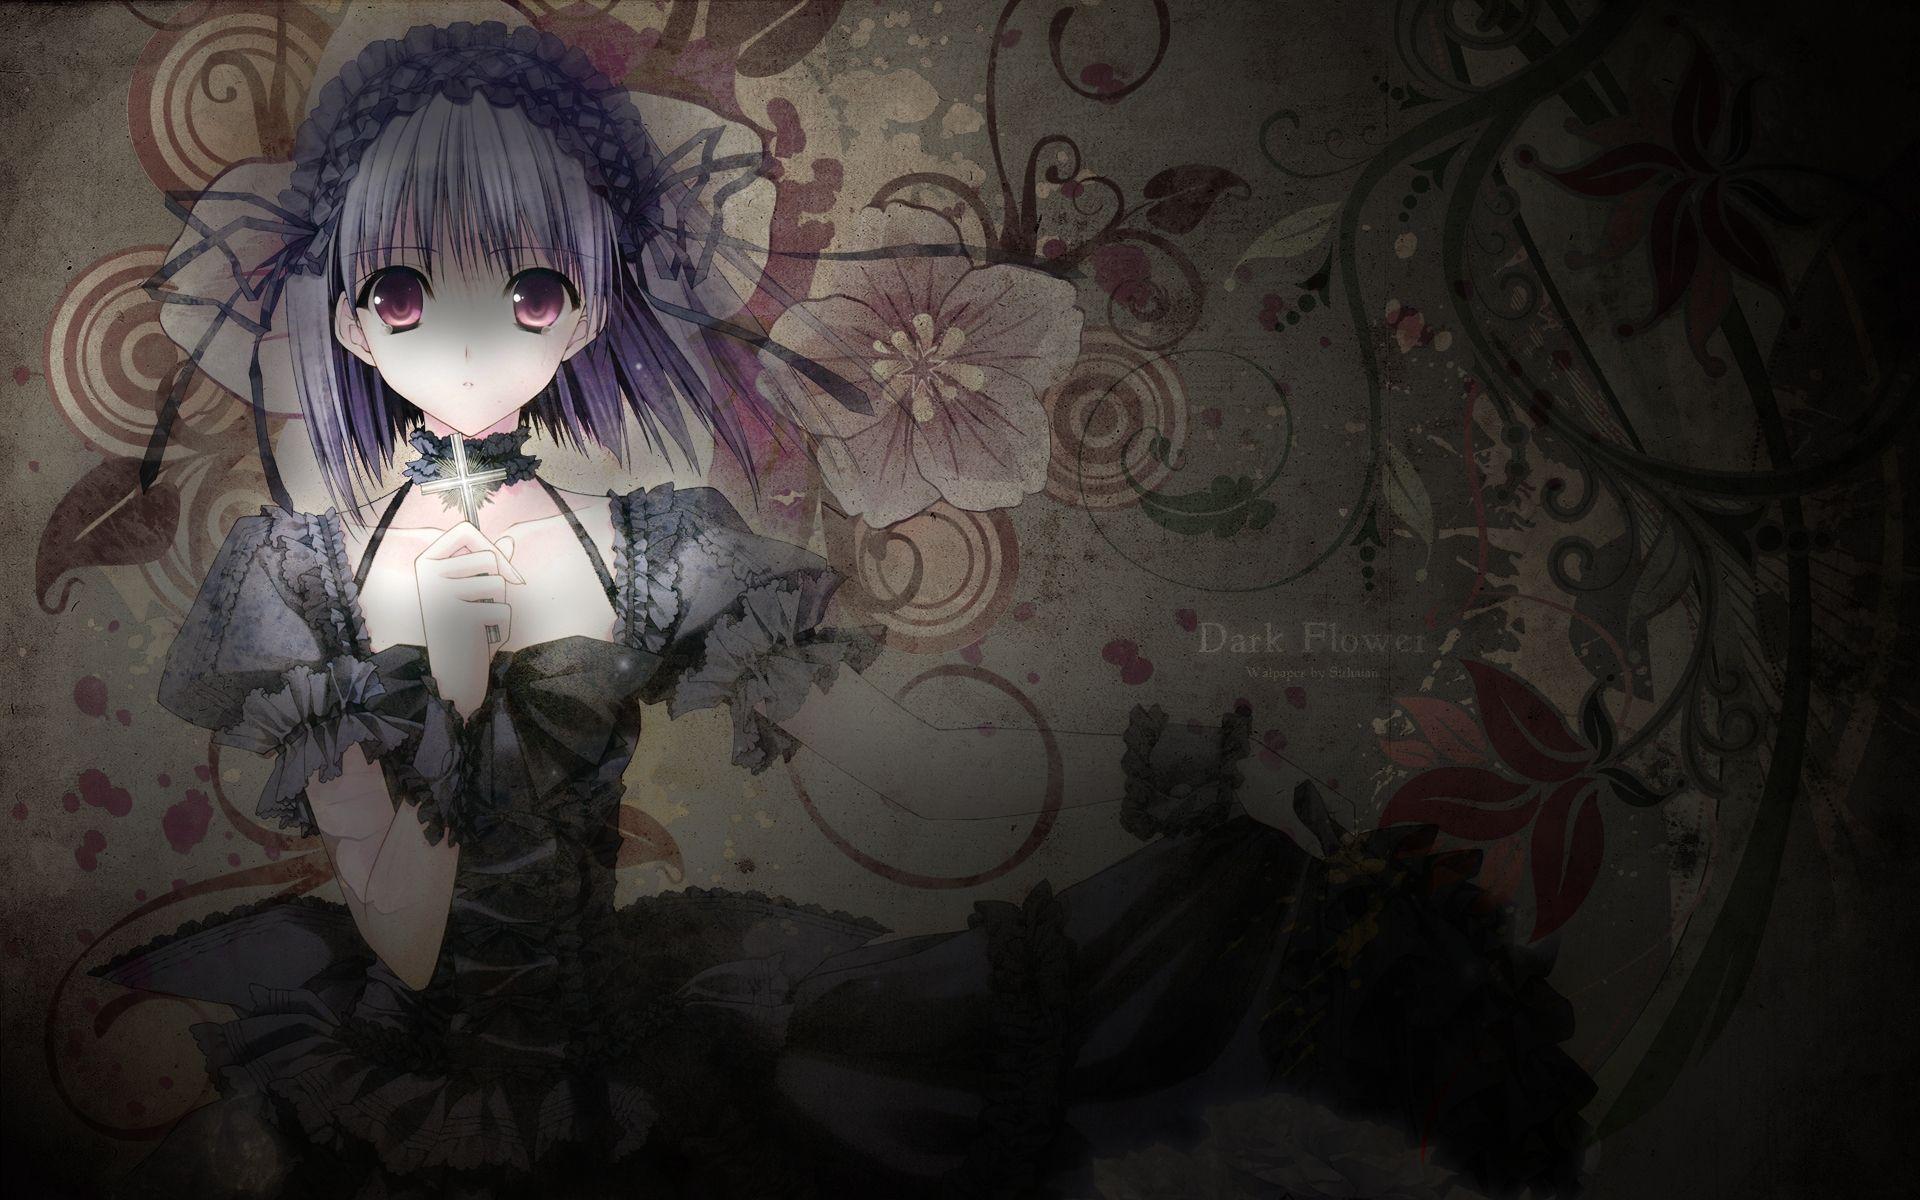 Anime Zombie Girl Wallpapers